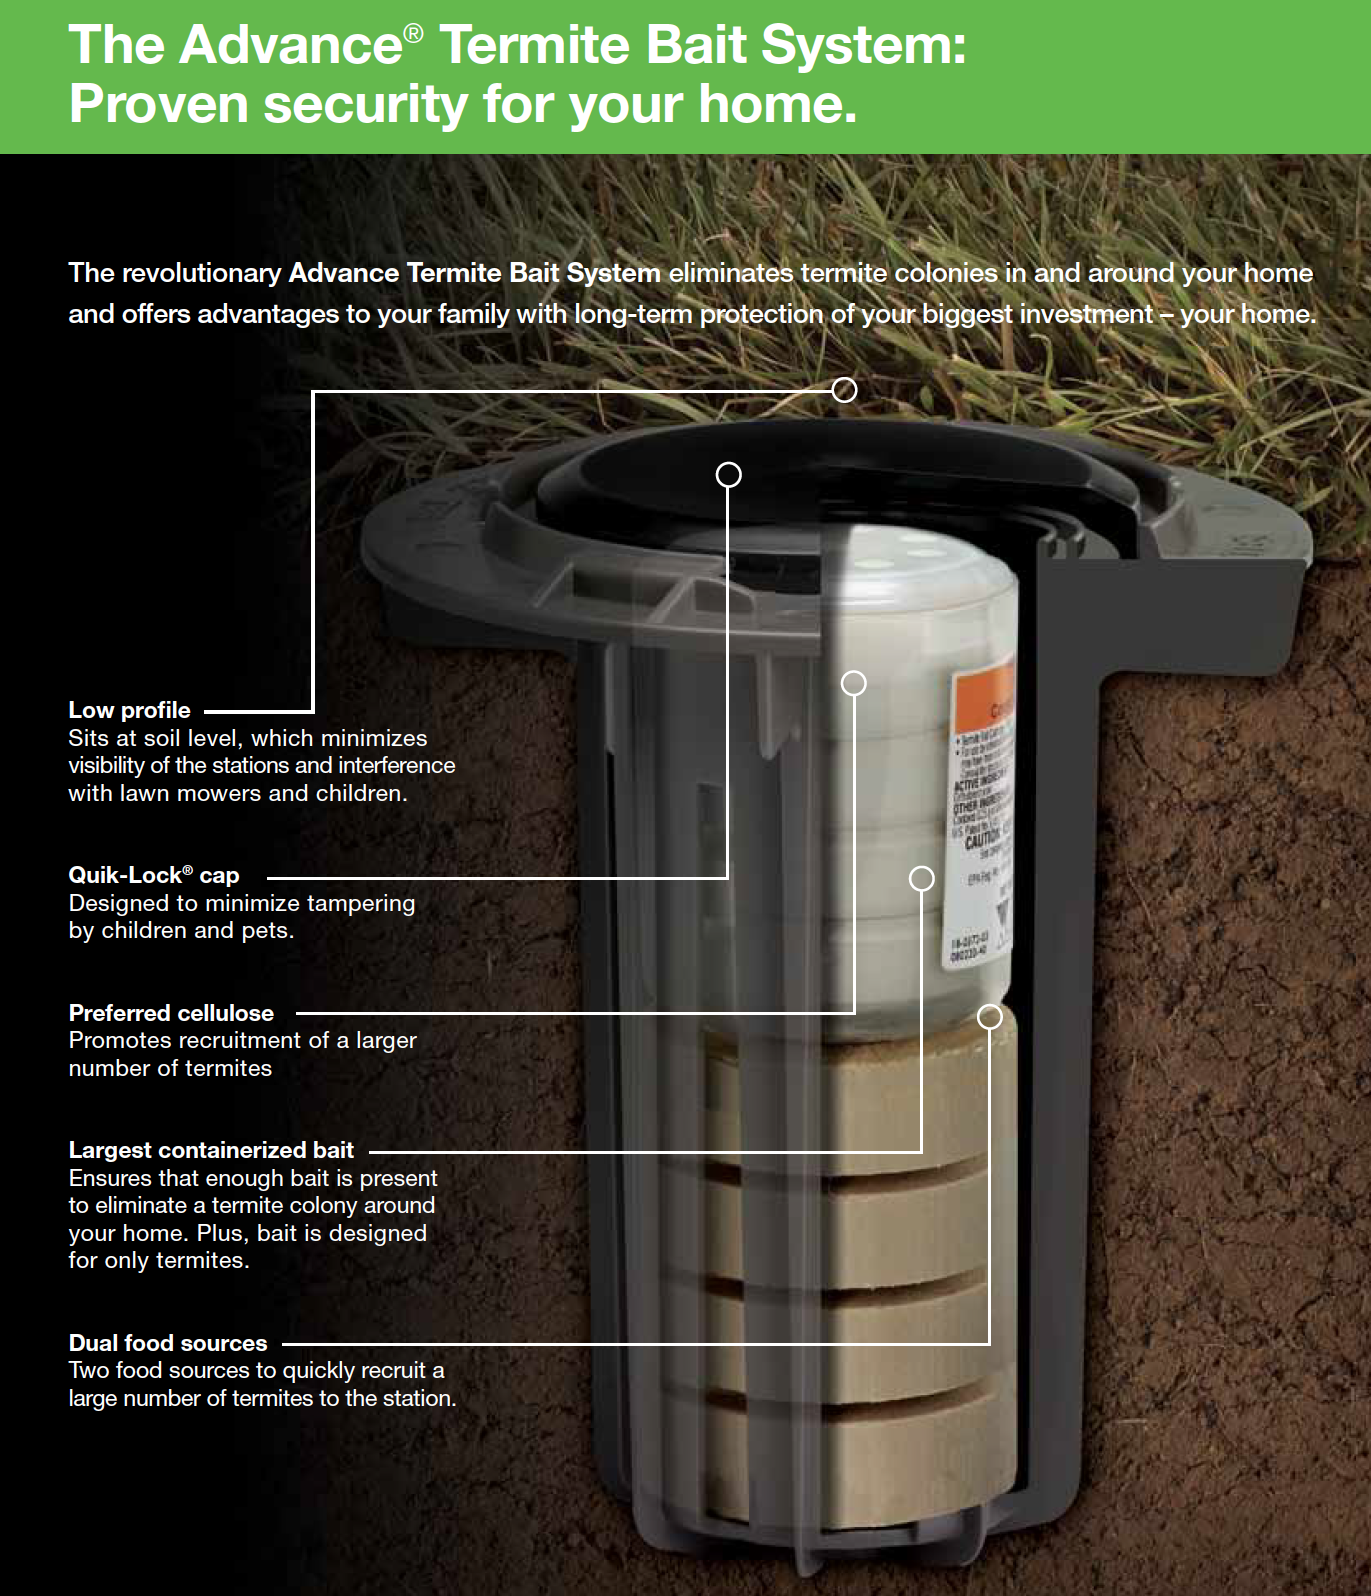 Advance Termite Bait System - Proven Security for your Home